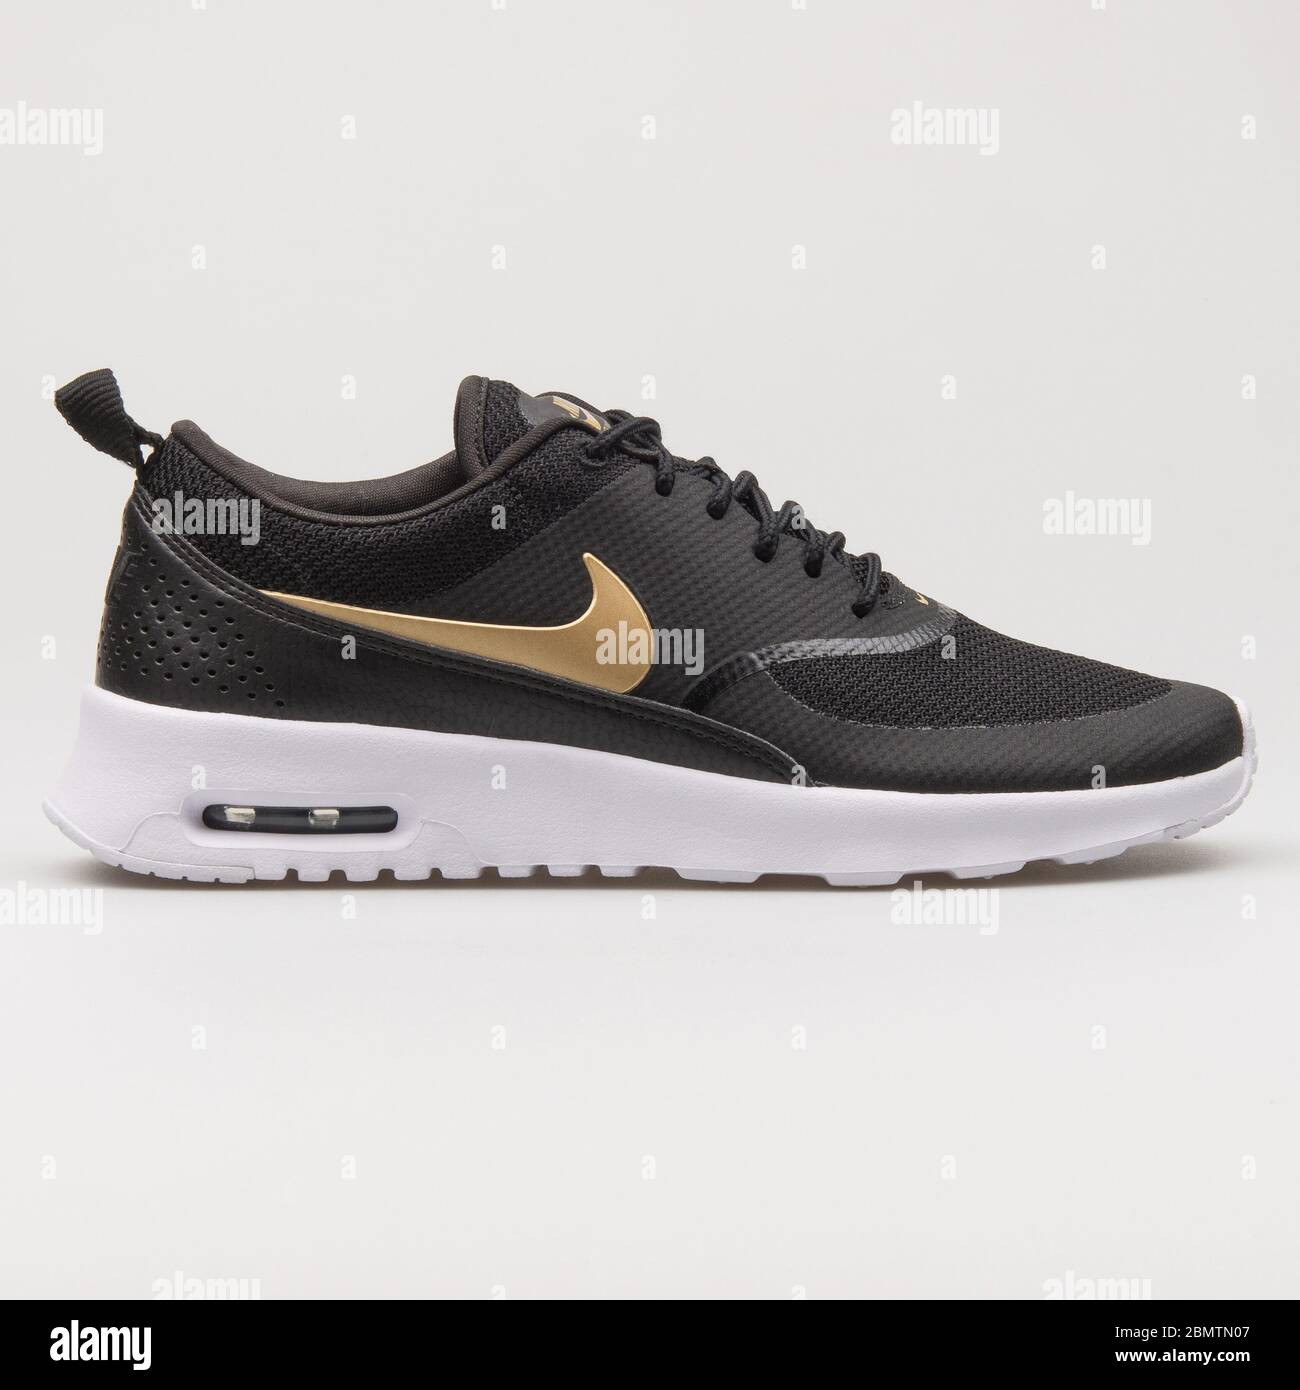 nike air max thea trainers in white and gold